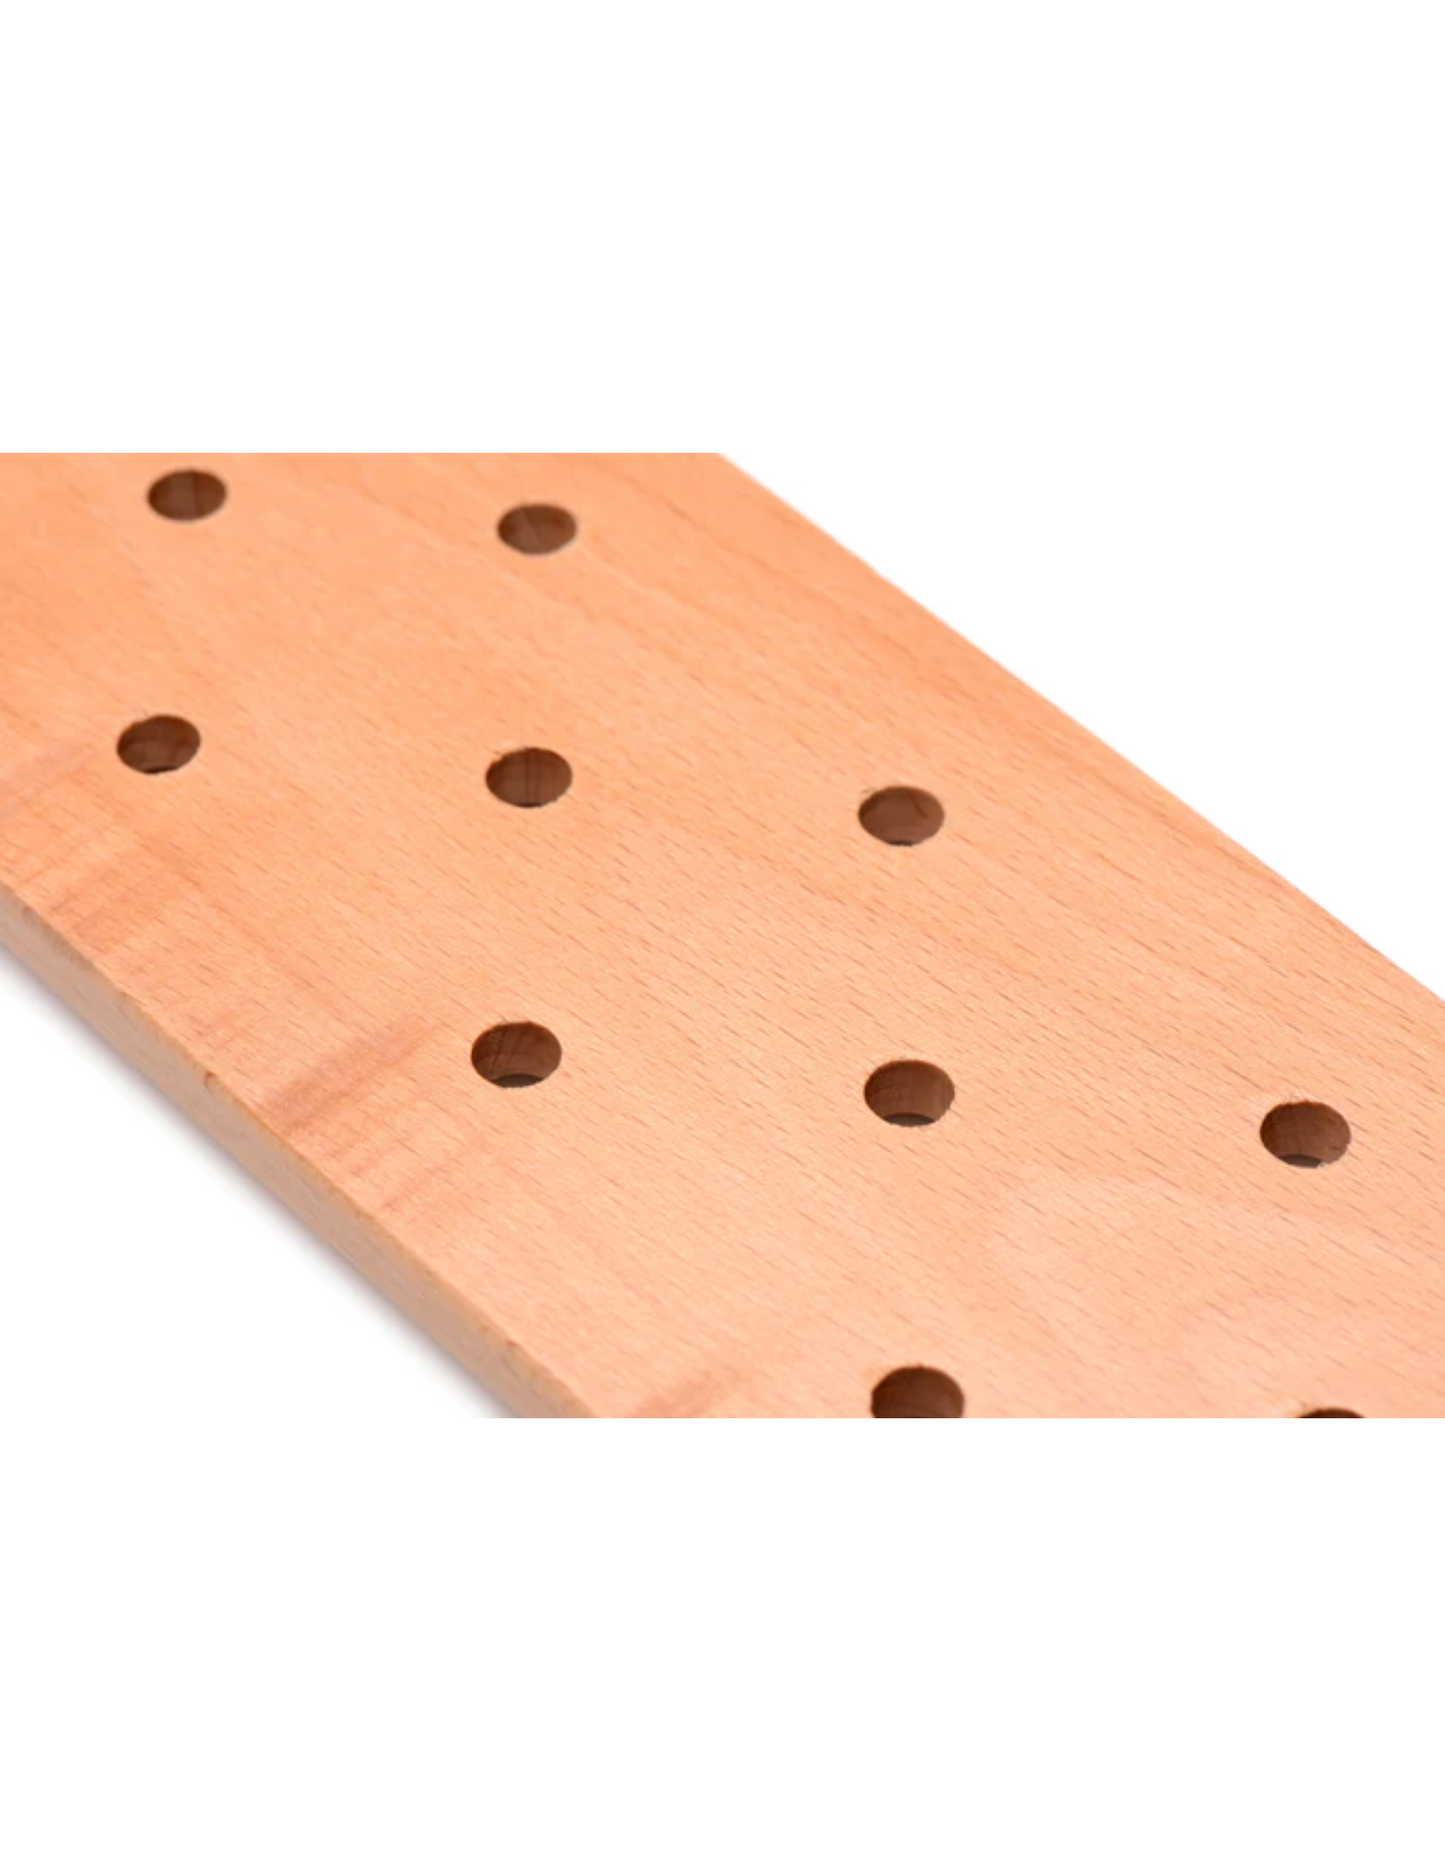 Close-up view of the wooden paddle showing the airflow holes.